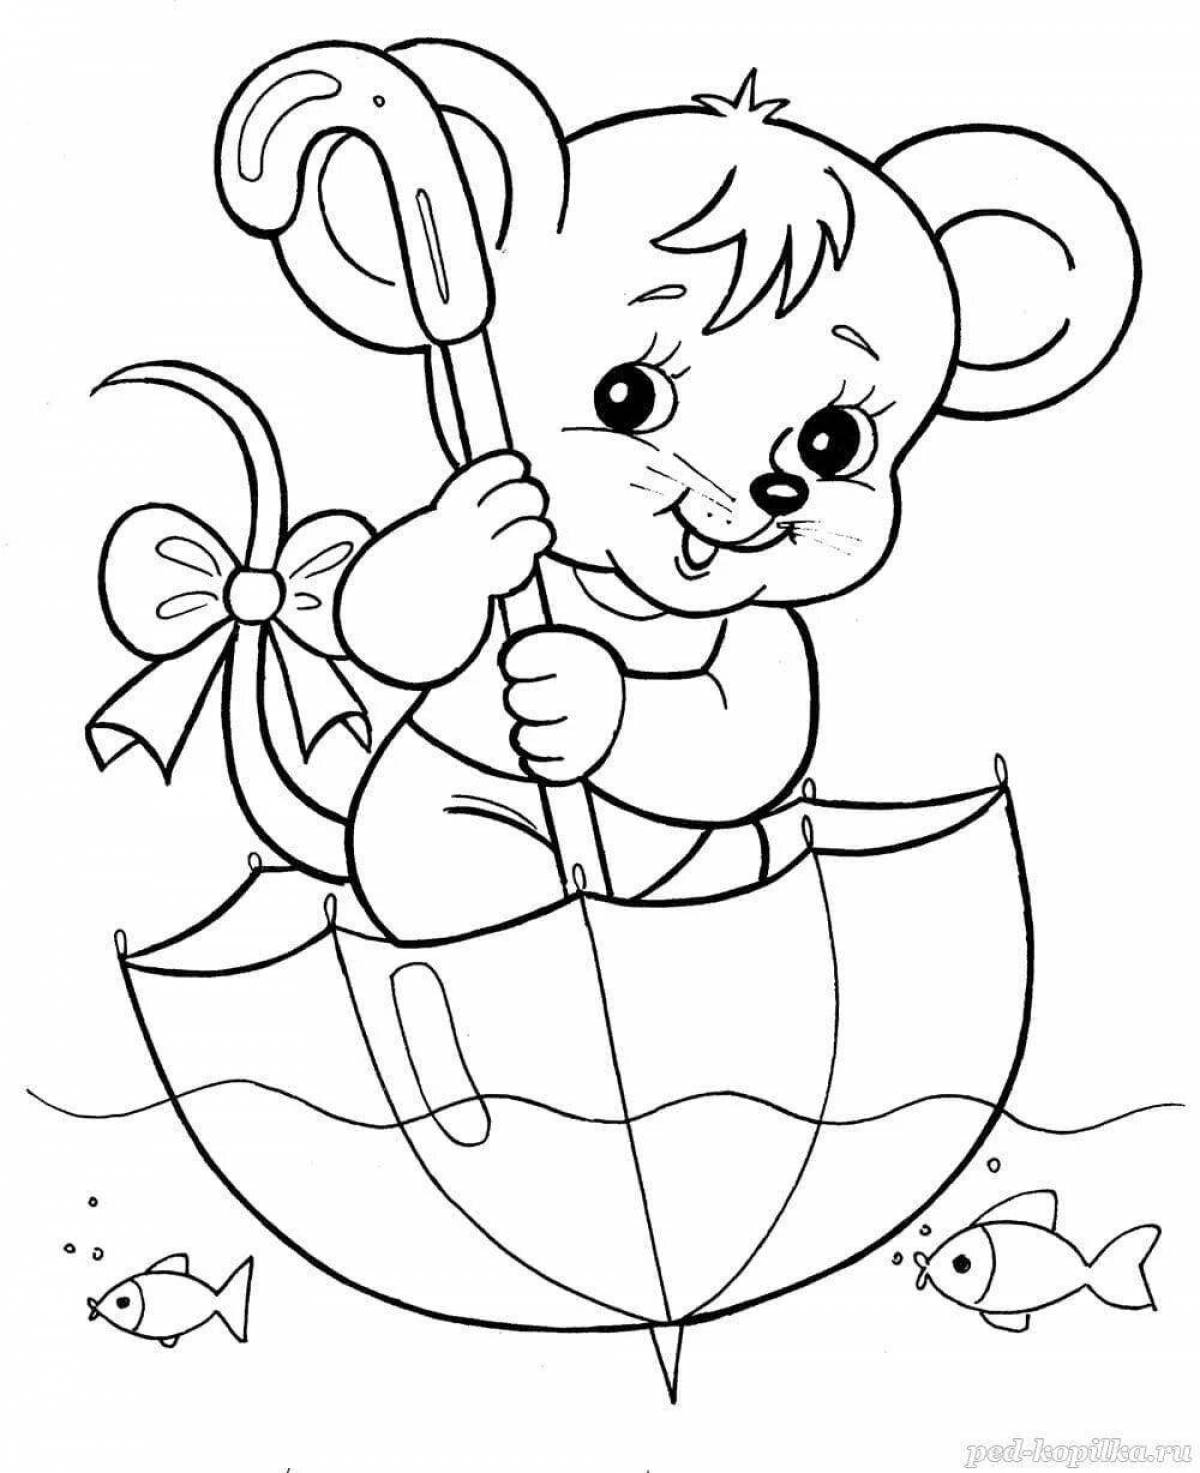 Creative coloring book for 4 year old girls